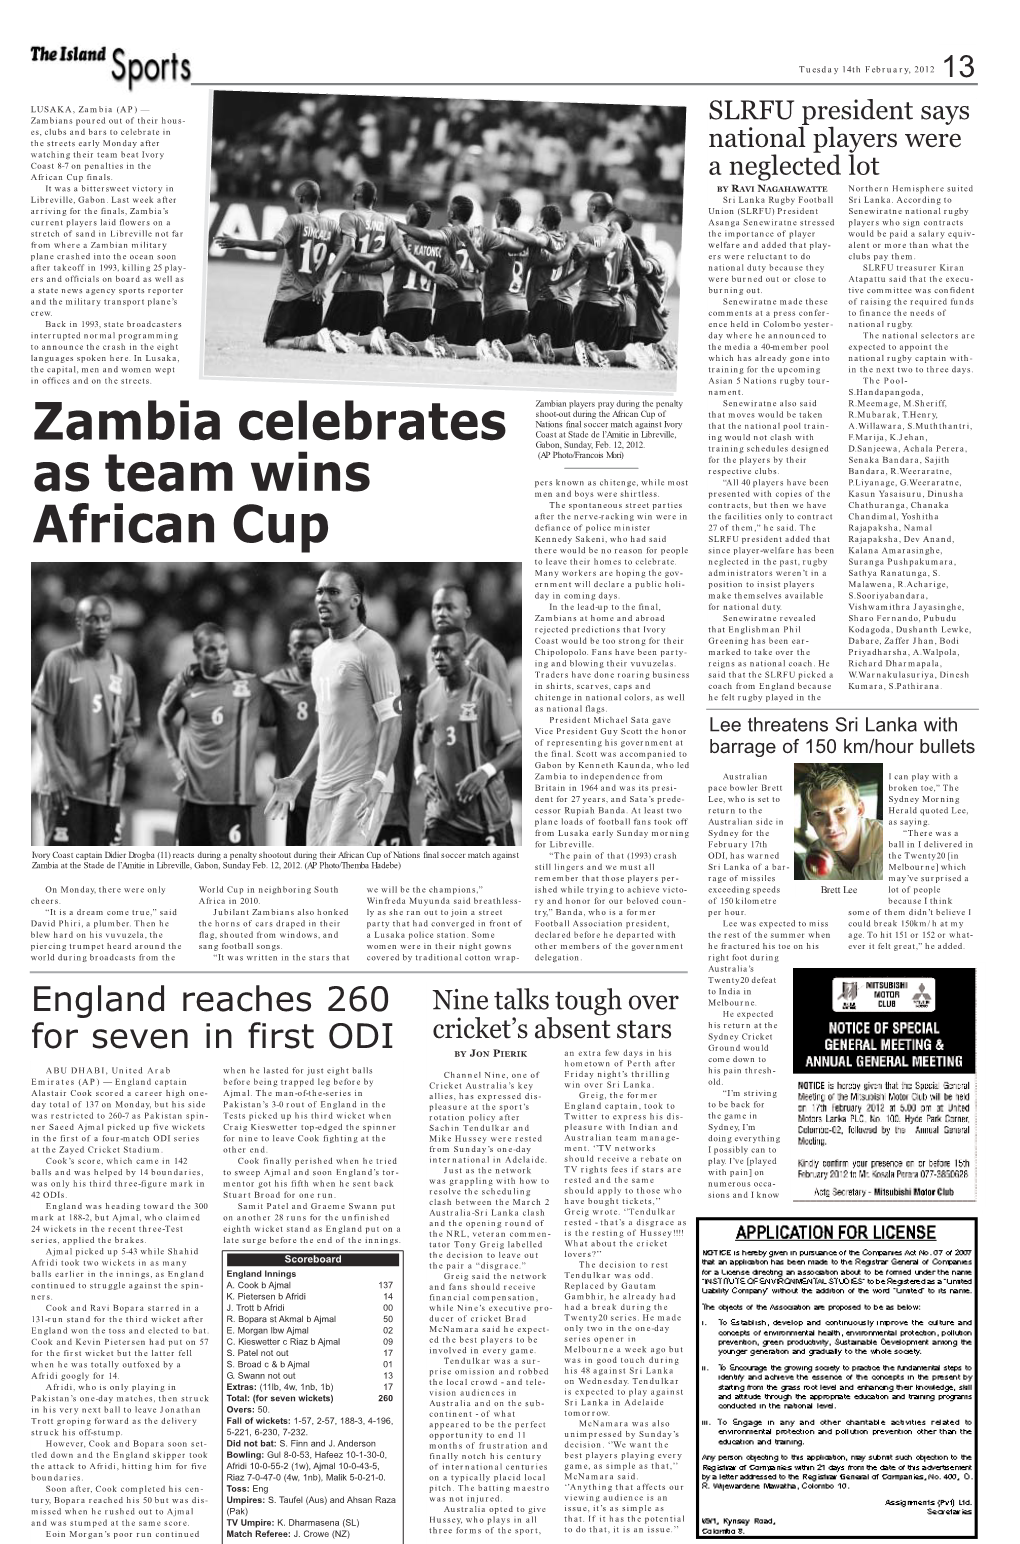 Zambia Celebrates As Team Wins African